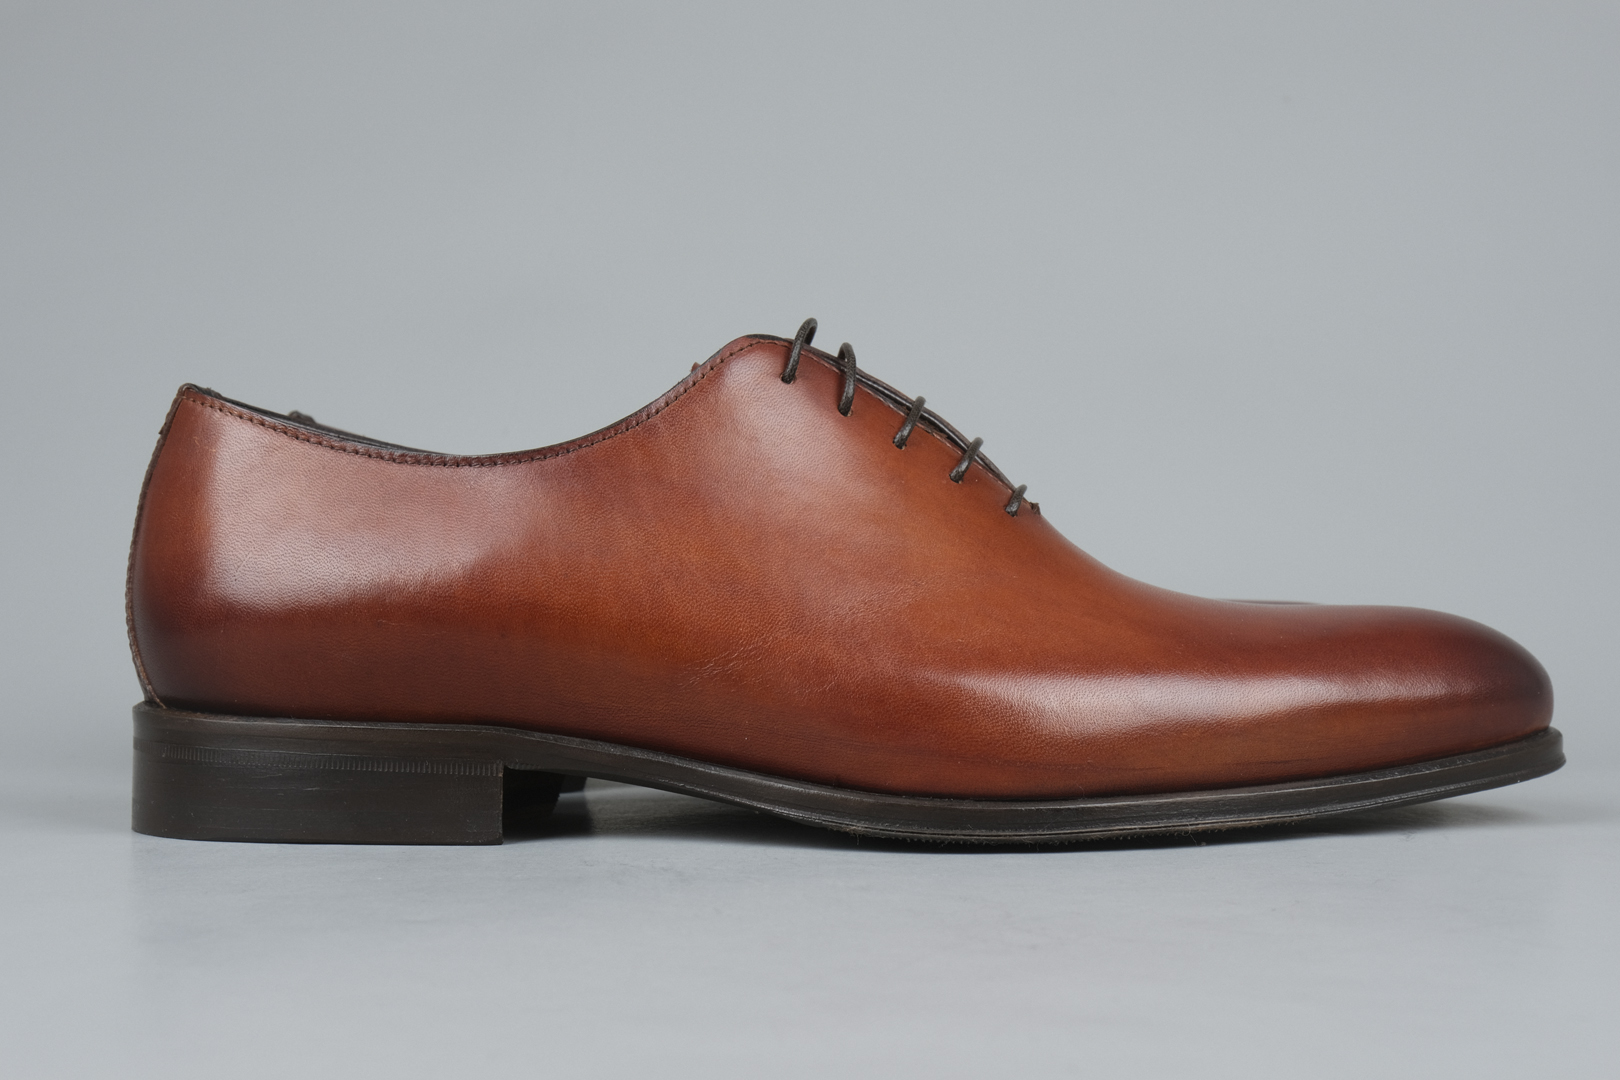 LEATHER WHOLECUT OXFORD SHOES - BROWN